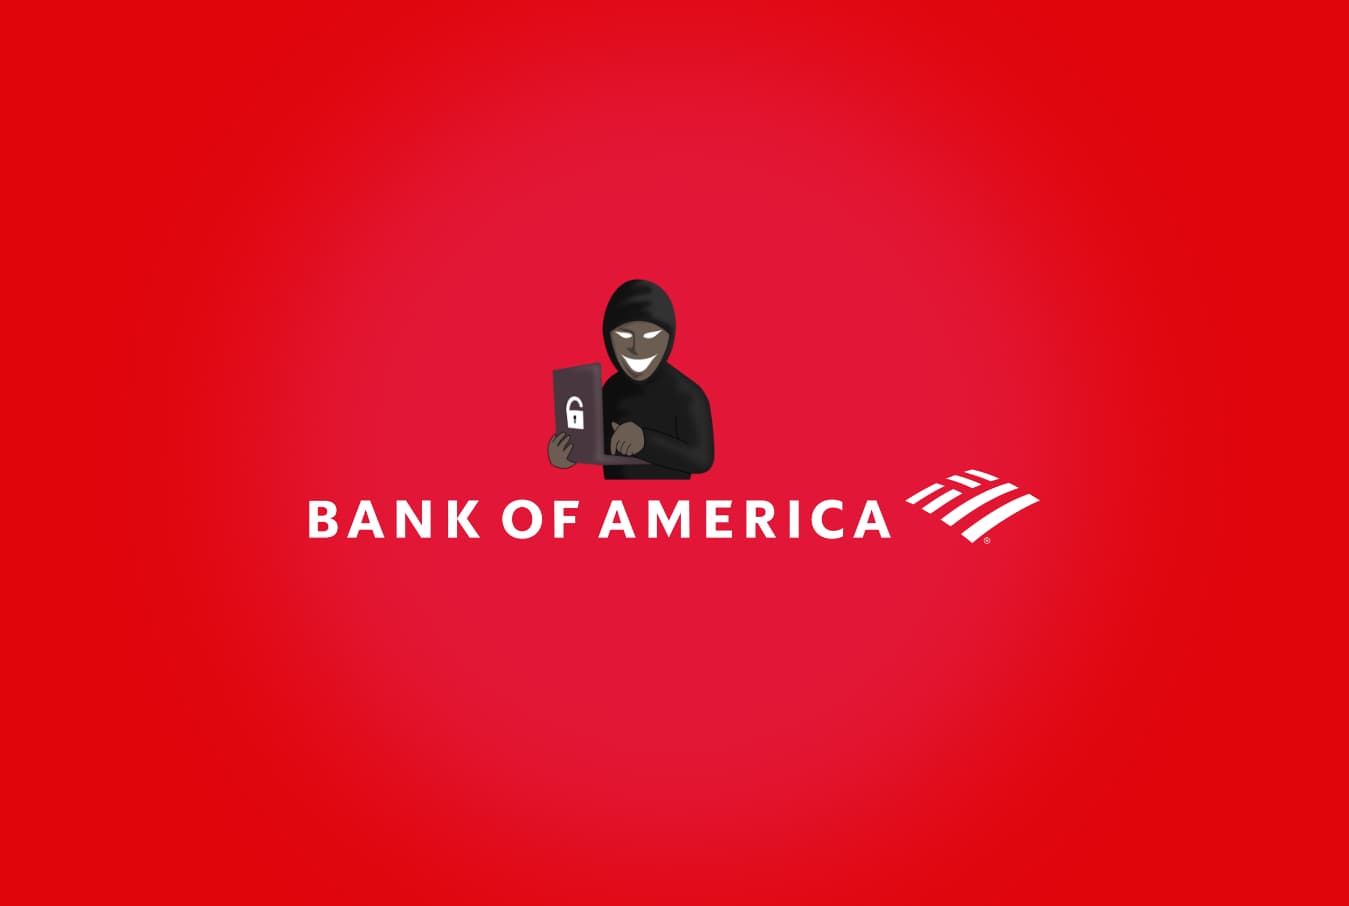 The Bank of America is the latest victim of a data breach MalwareTips